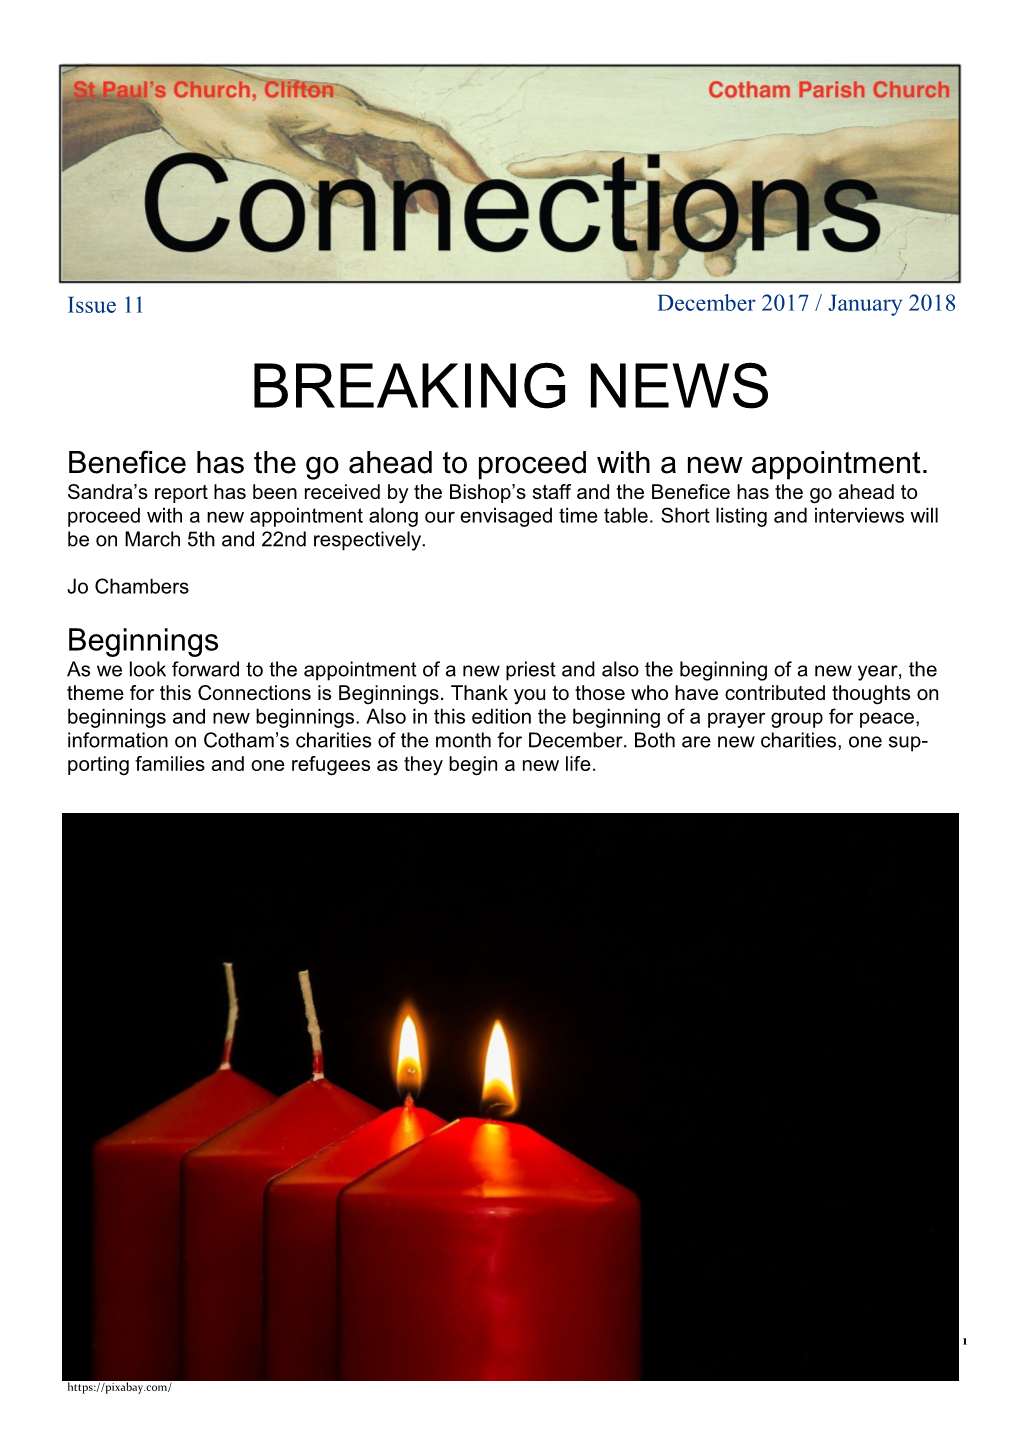 BREAKING NEWS Benefice Has the Go Ahead to Proceed with a New Appointment